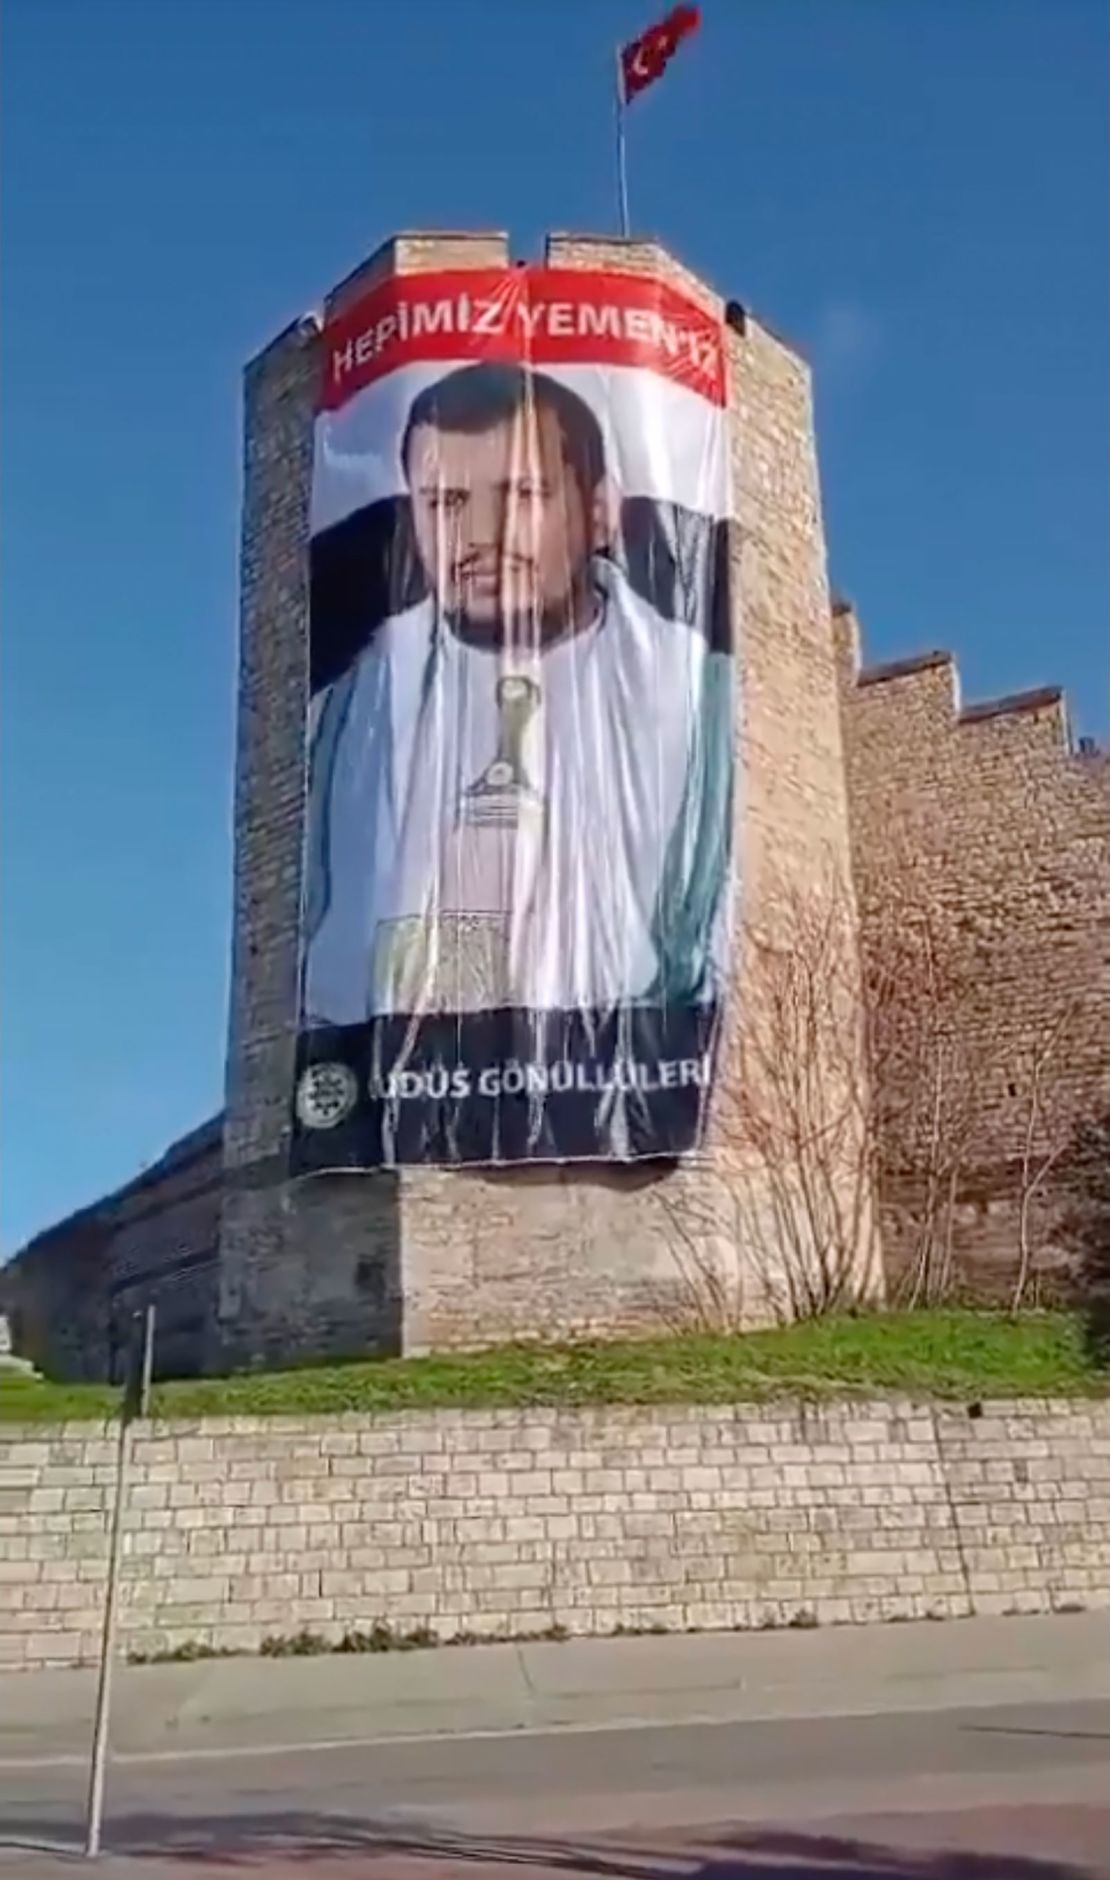 A giant poster featuring Yemeni rebel leader Abdel Malek al-Houthi was hung on the ancient Walls of Constantinople in Istanbul, just days after his organization was designated a terror group by the United States. "We are all Yemenis," read the text in Turkish.